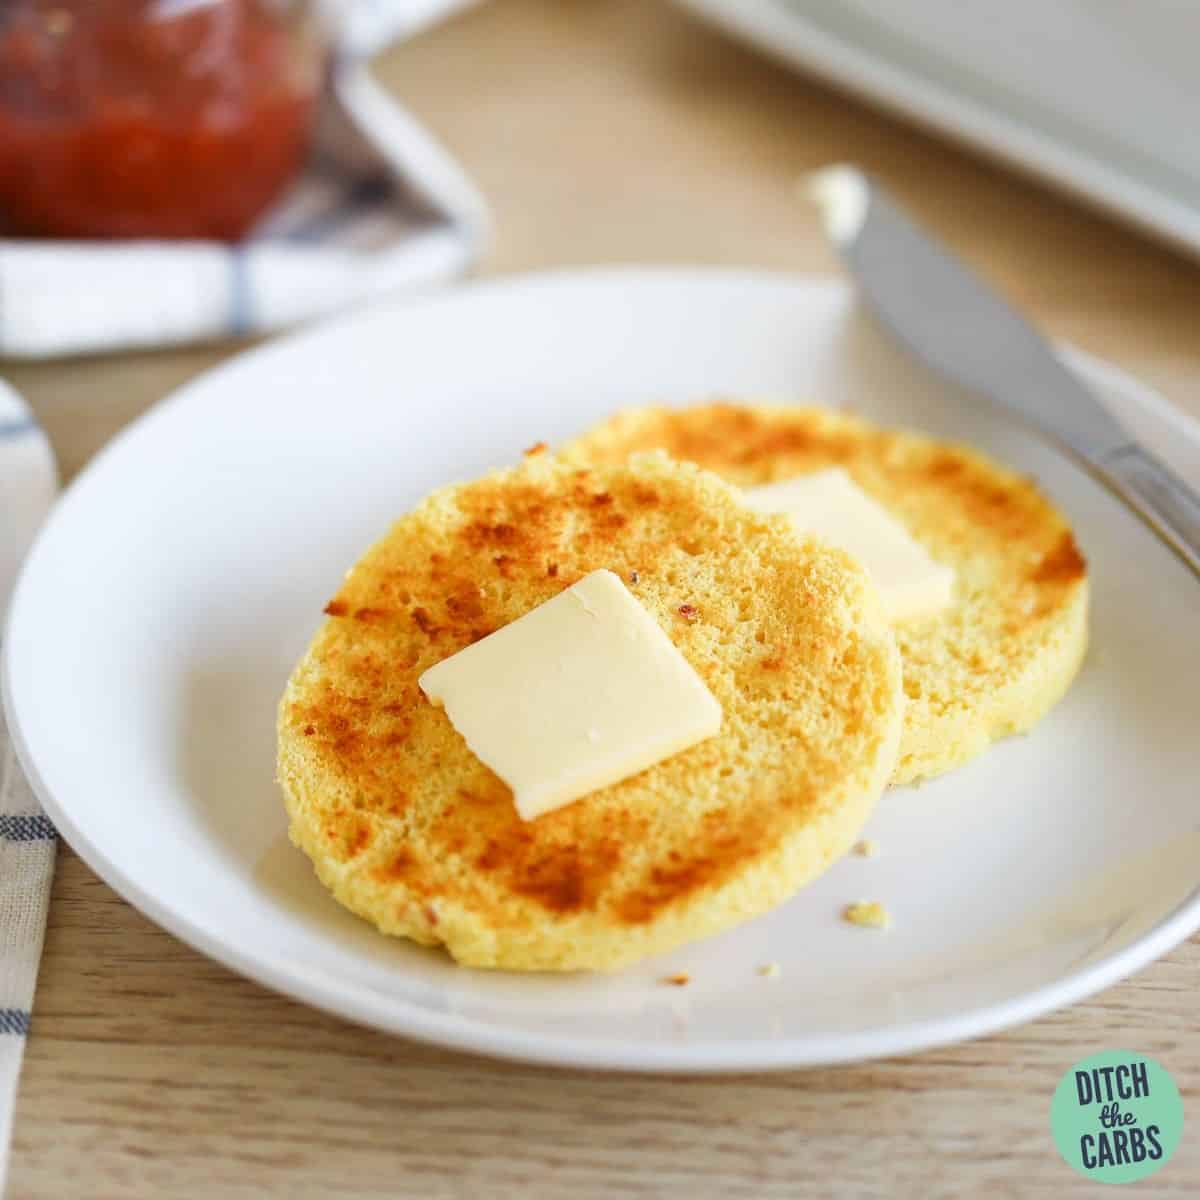 Low-carb English muffin cut in half and toasted with a pat of butter on each half.